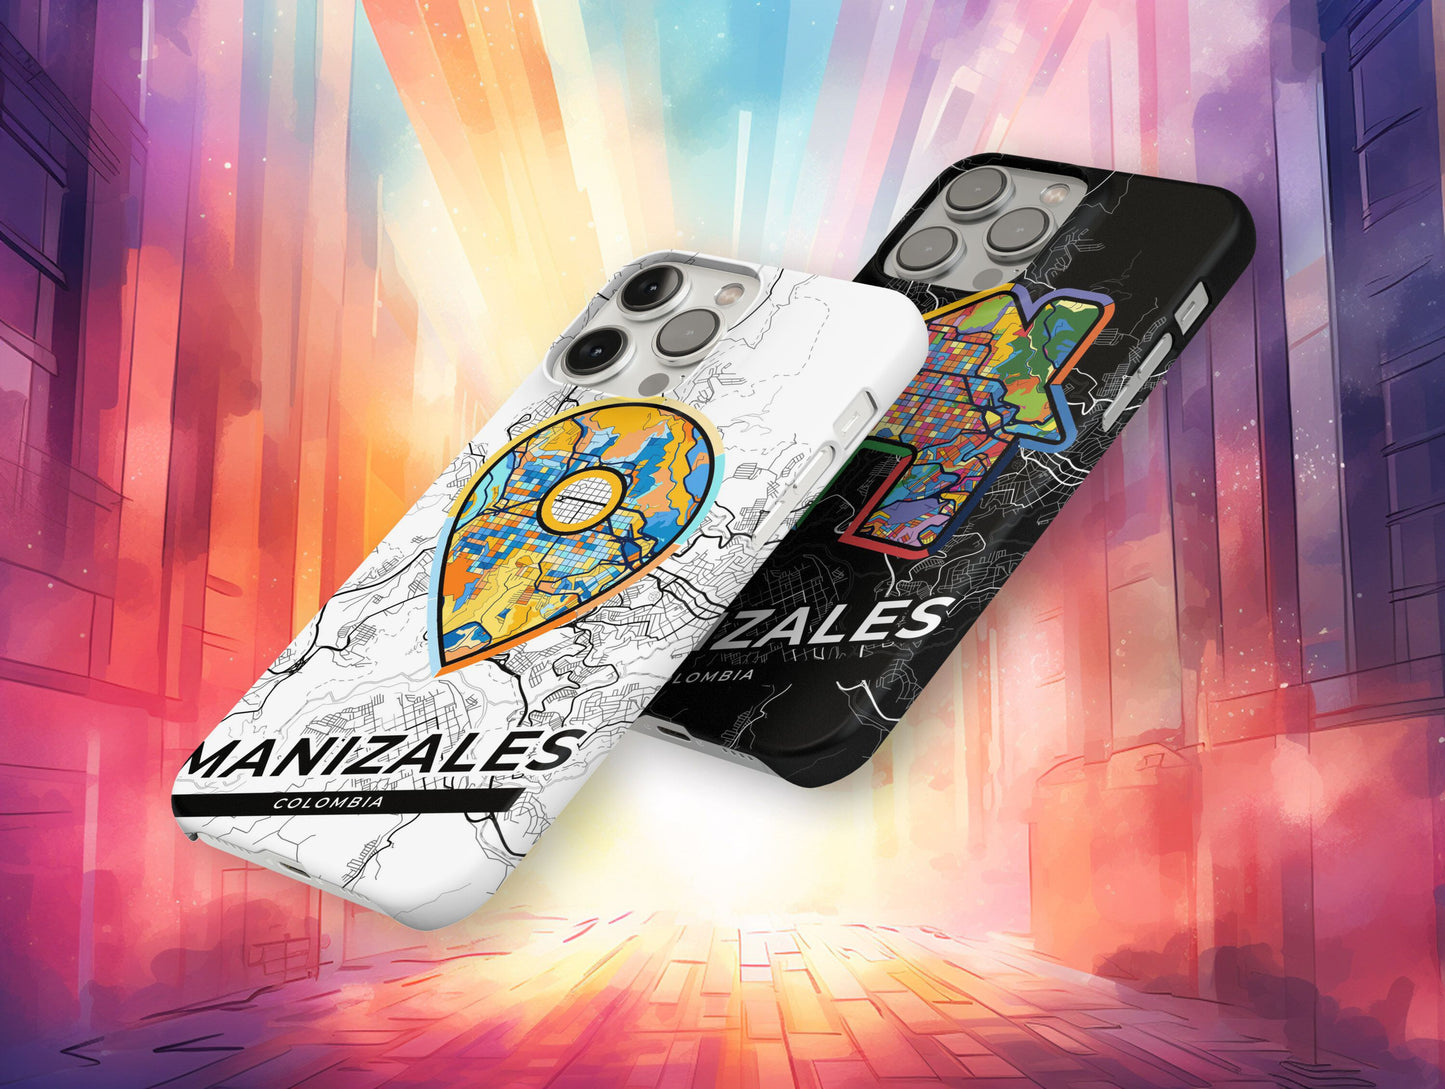 Manizales Colombia slim phone case with colorful icon. Birthday, wedding or housewarming gift. Couple match cases.